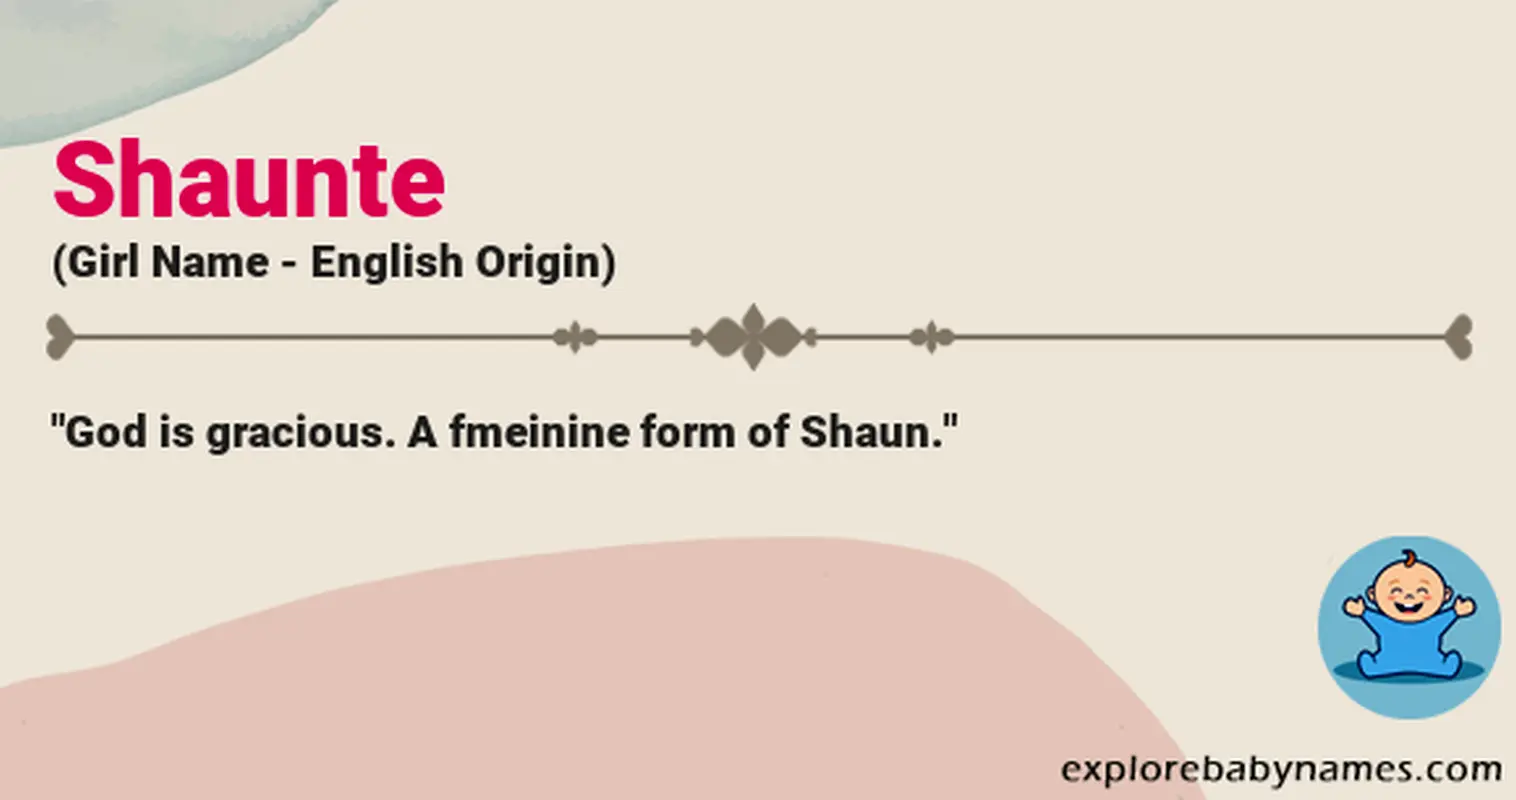 Meaning of Shaunte